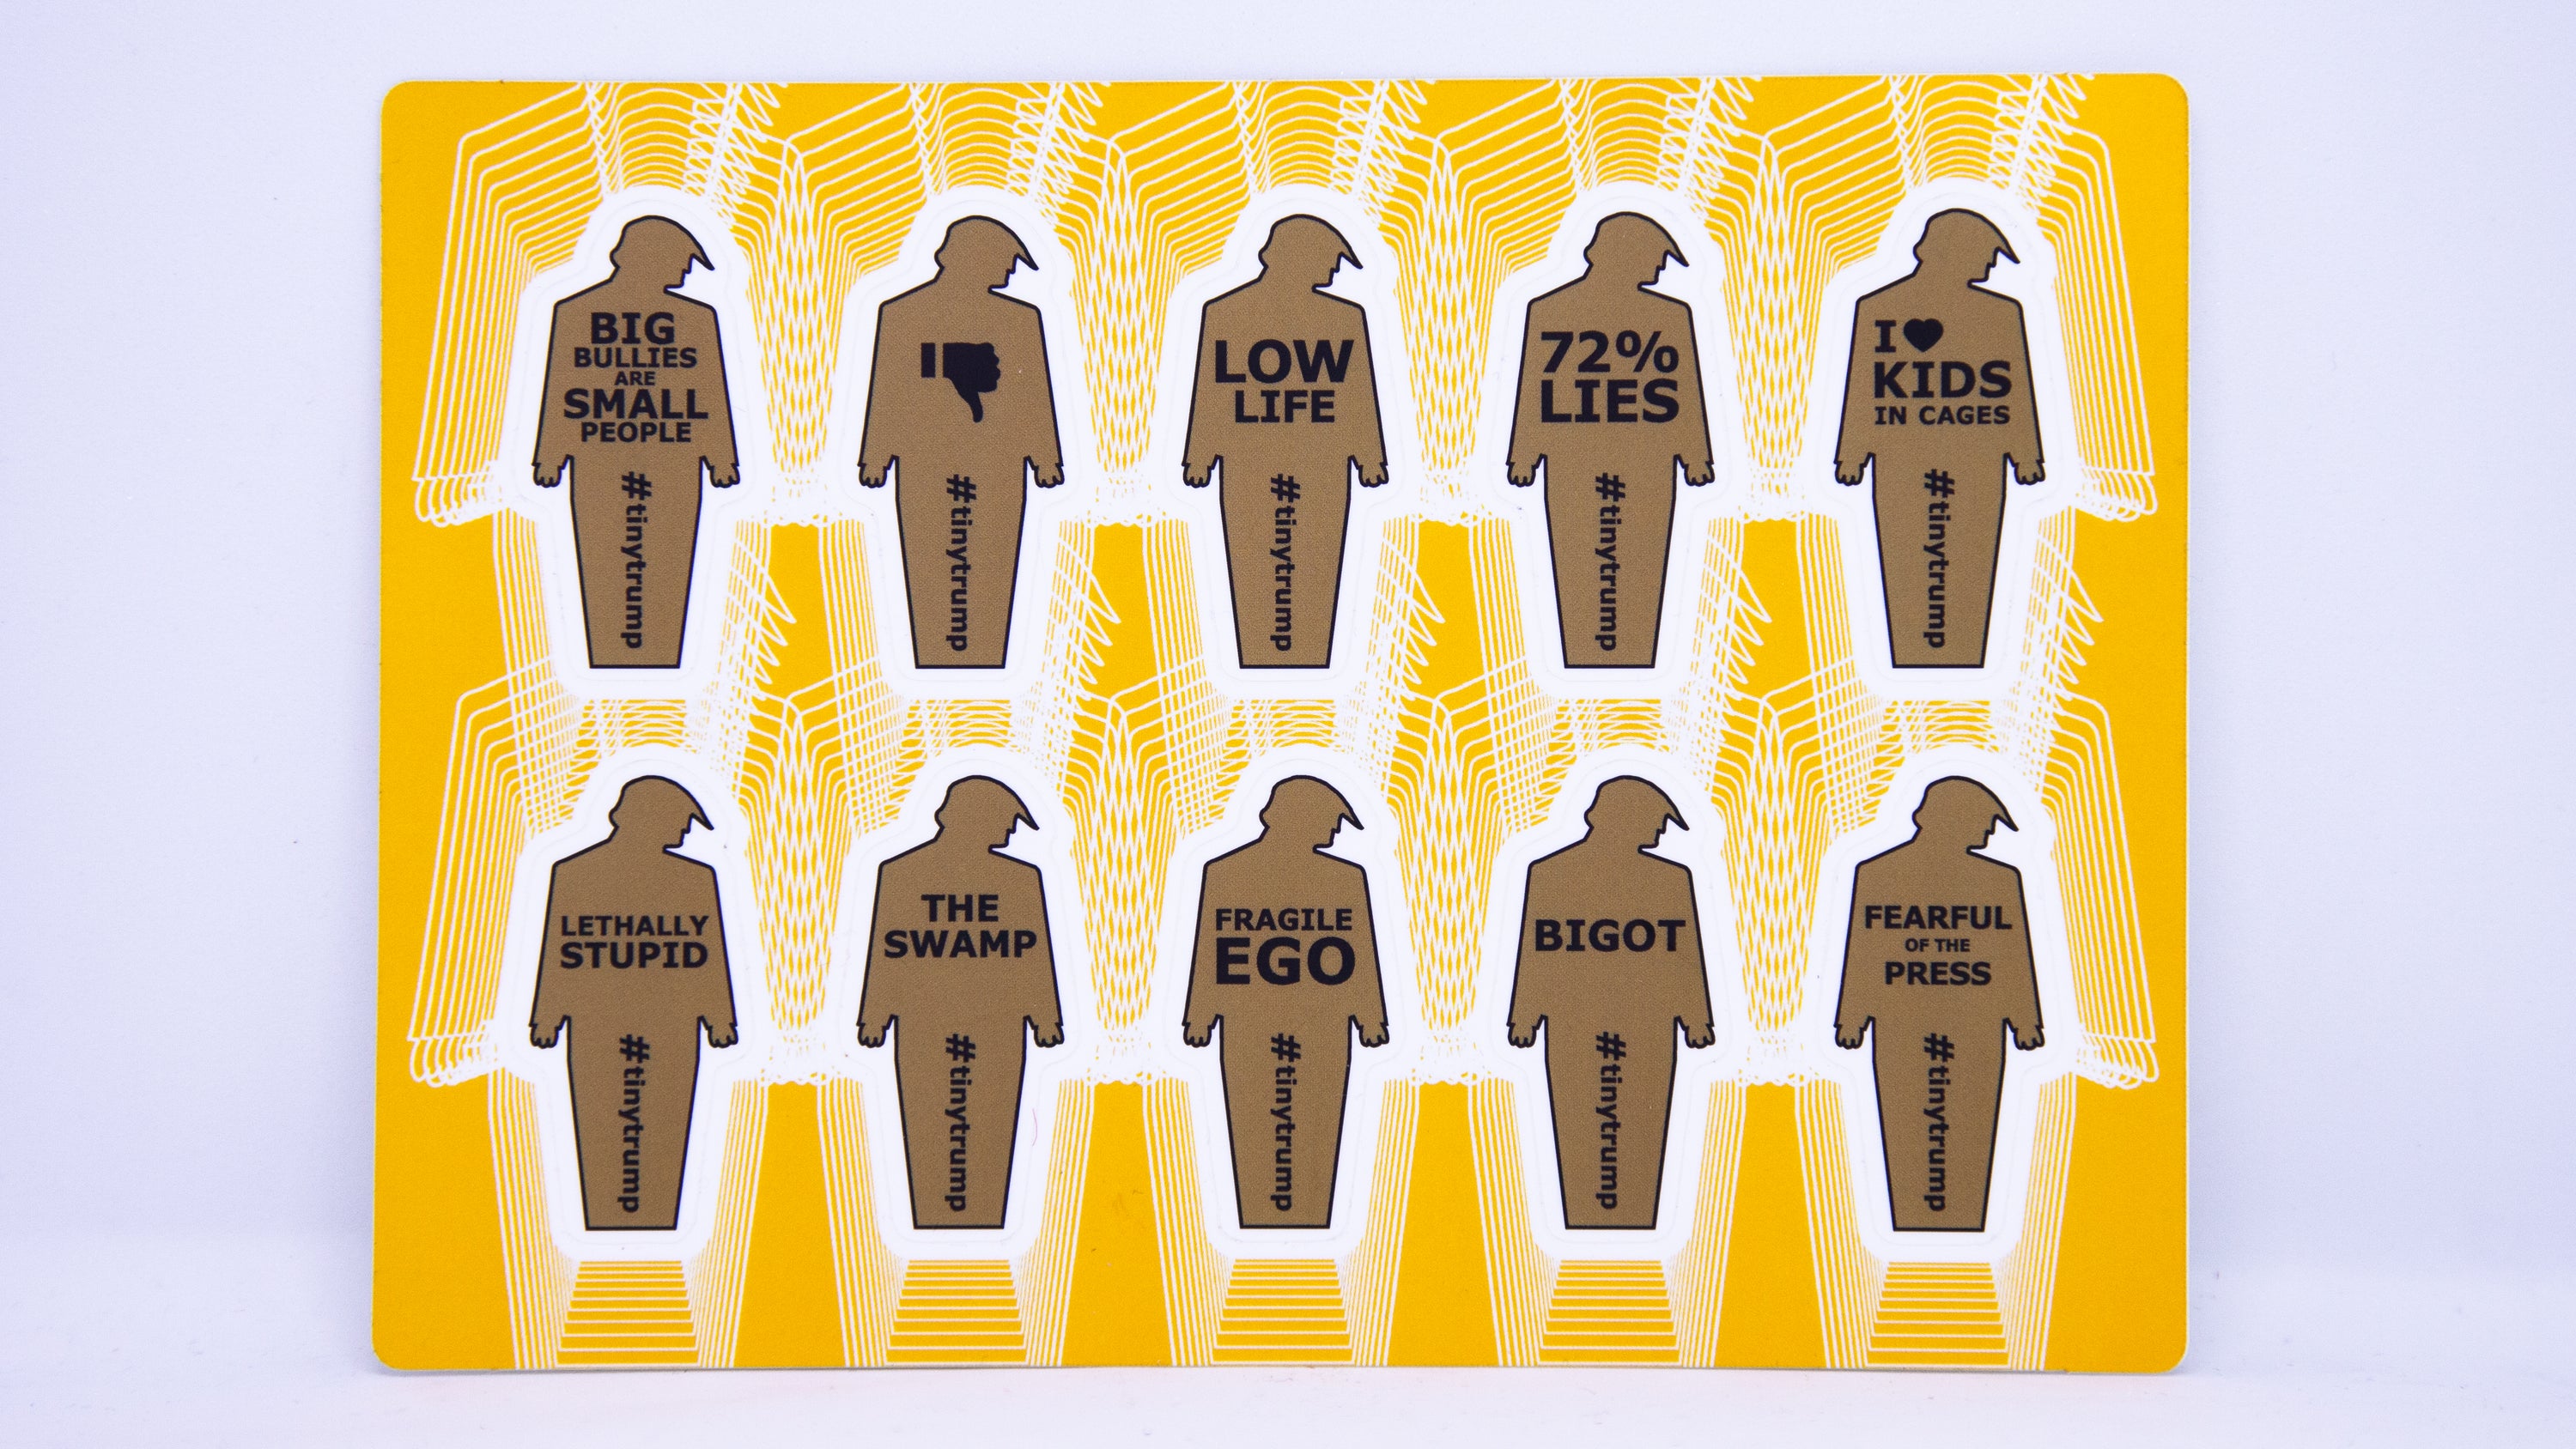 A sticker sheet with 10 two inch tall tiny trumps with the following slogans: Big Bullies Are Small People, thumbs down symbol, Low Life, 72% Lies, I heart Kids in Cages, Lethally Stupid, The Swamp, Fragile Ego, Bigot, Fearful of the Press